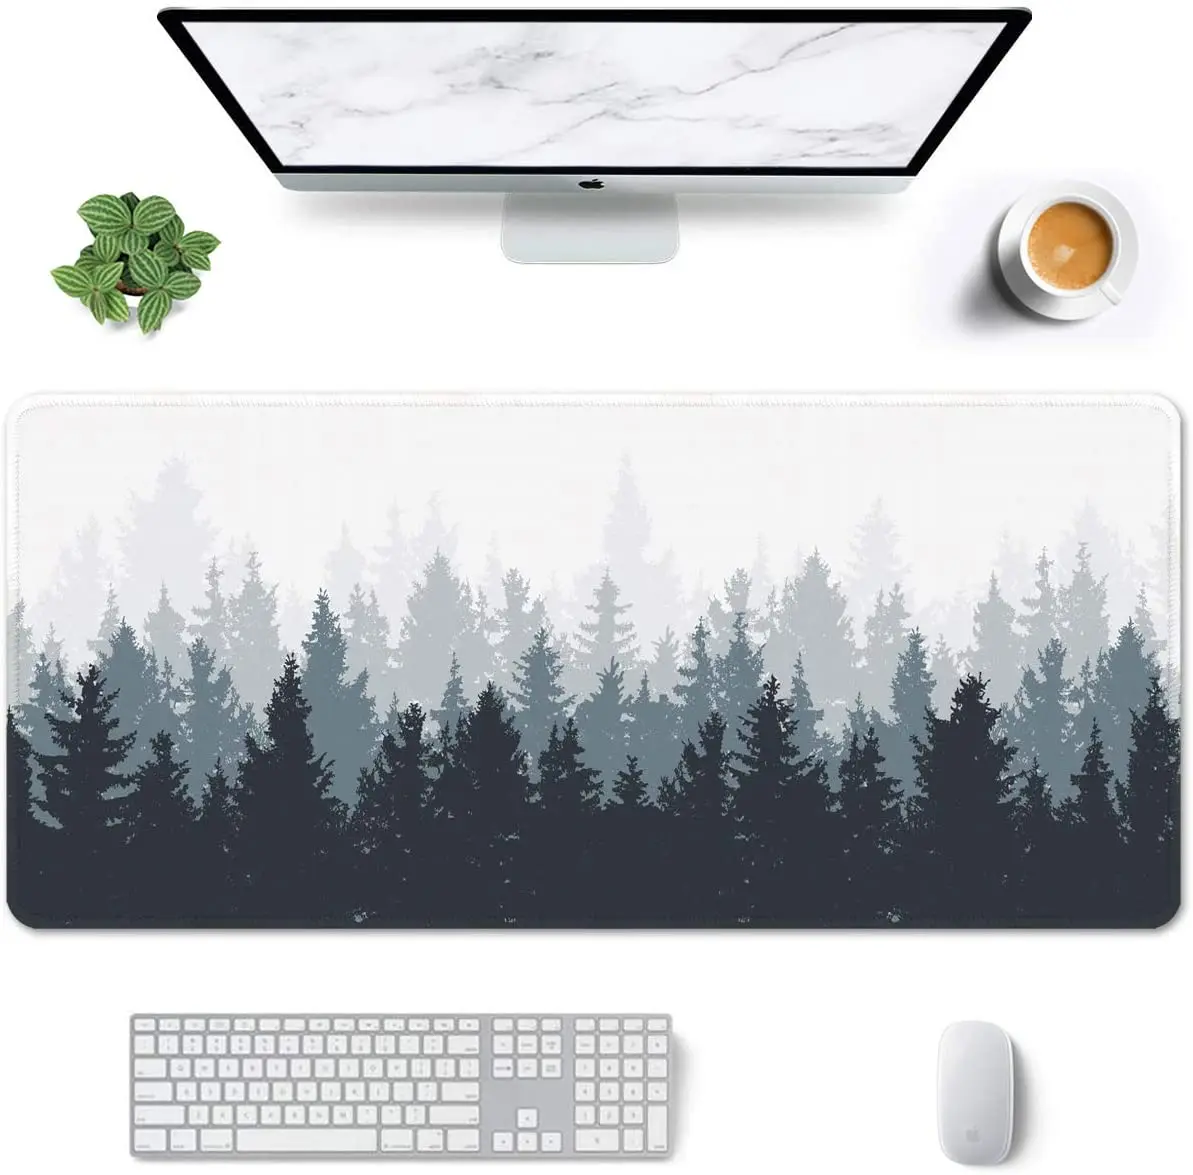 

Misty Forest Large Mouse Pad Full Desk XXL Extended Gaming Mouse Pad with Stitched Edge Non-Slip Laptop Computer Mousepad